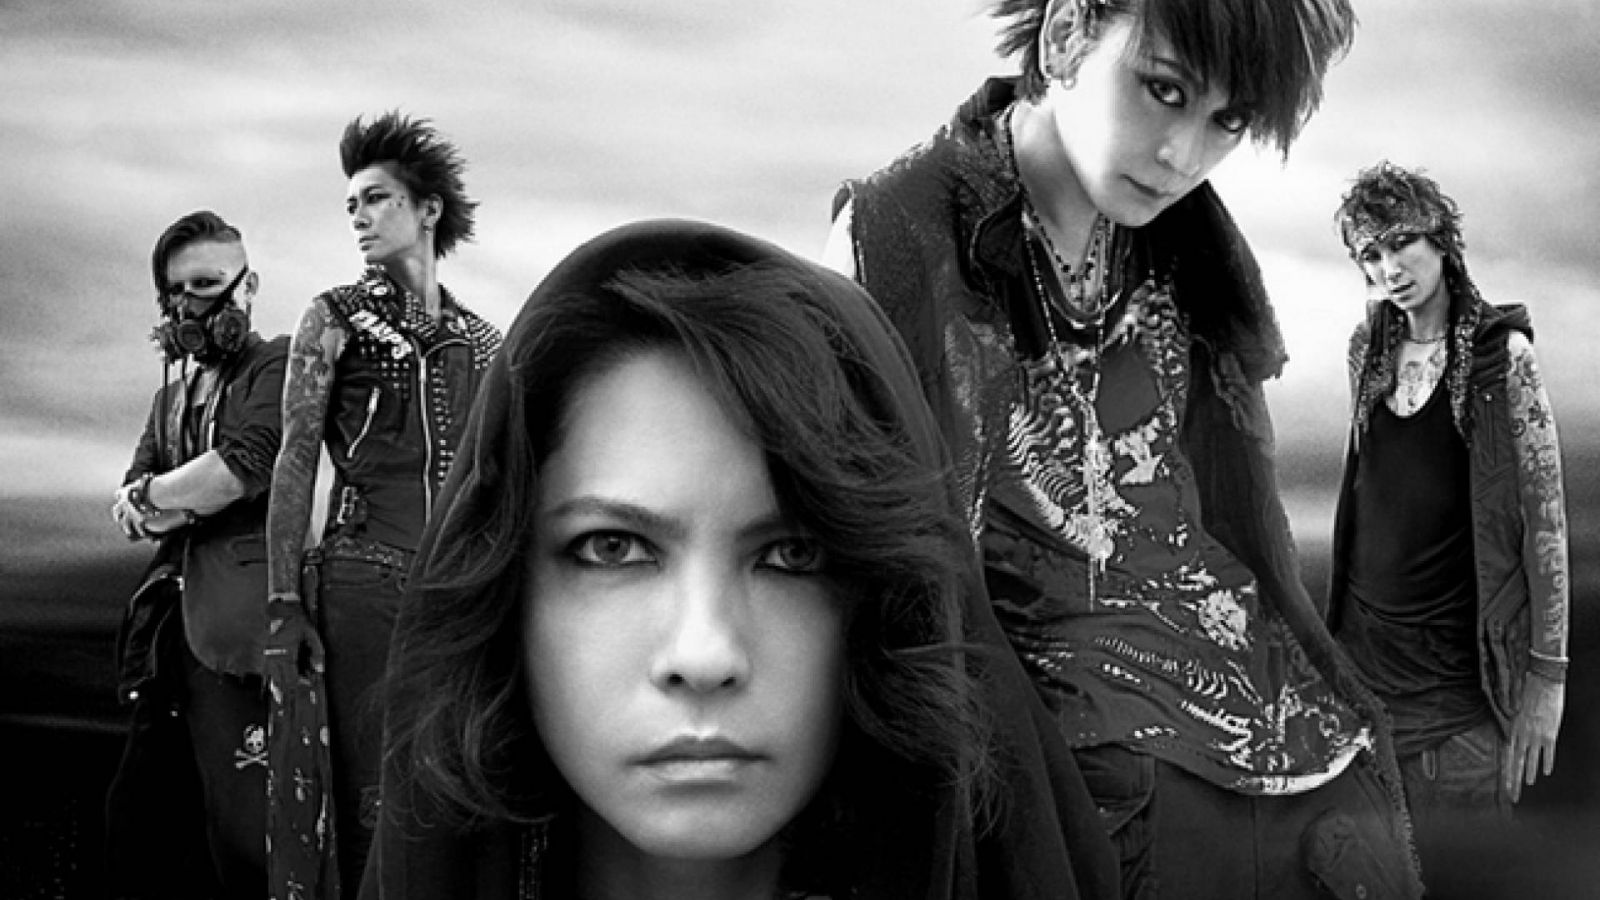 VAMPS to Perform in Latin America © 2015 VAMPROSE Inc. All rights reserved.